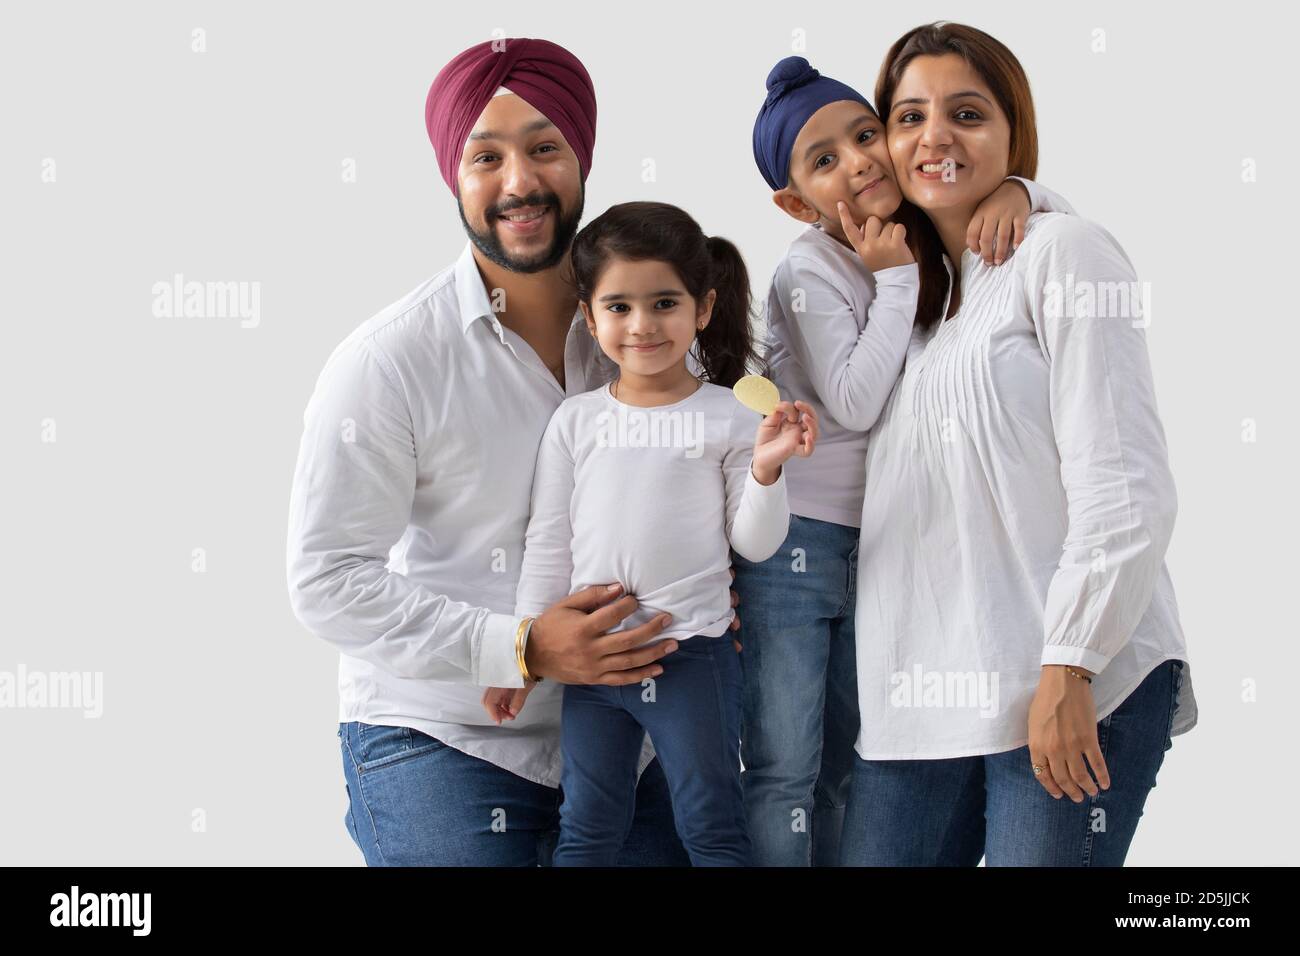 A SIKH FAMILY ENJOYING TIME TOGETHER Stock Photo